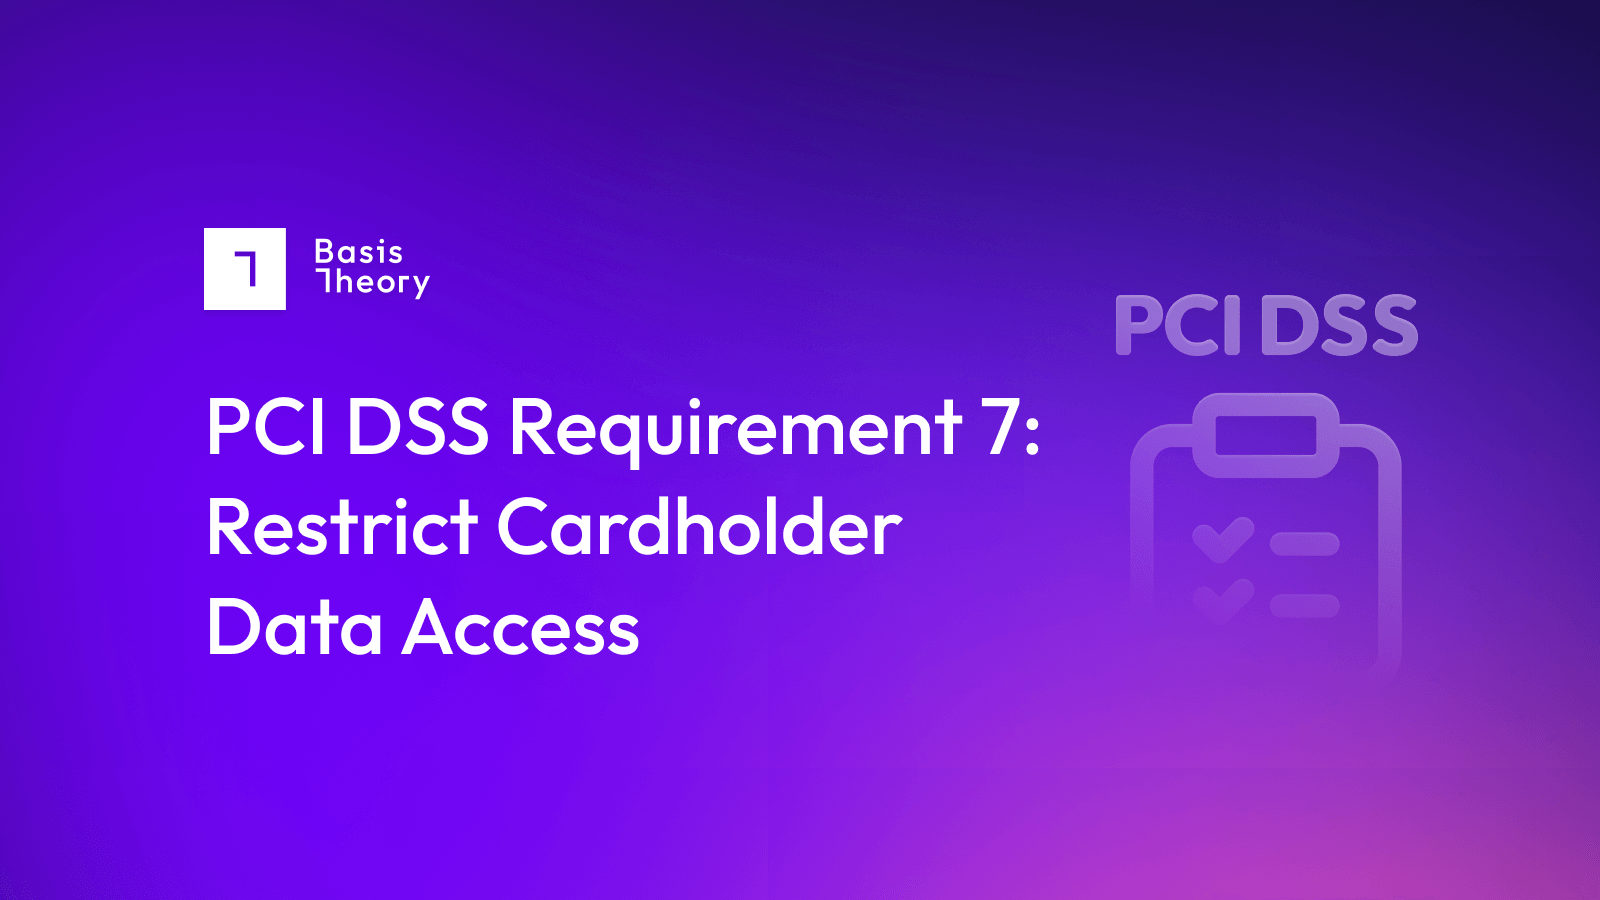 PCI DSS Requirement 7: Restrict Cardholder Data Access